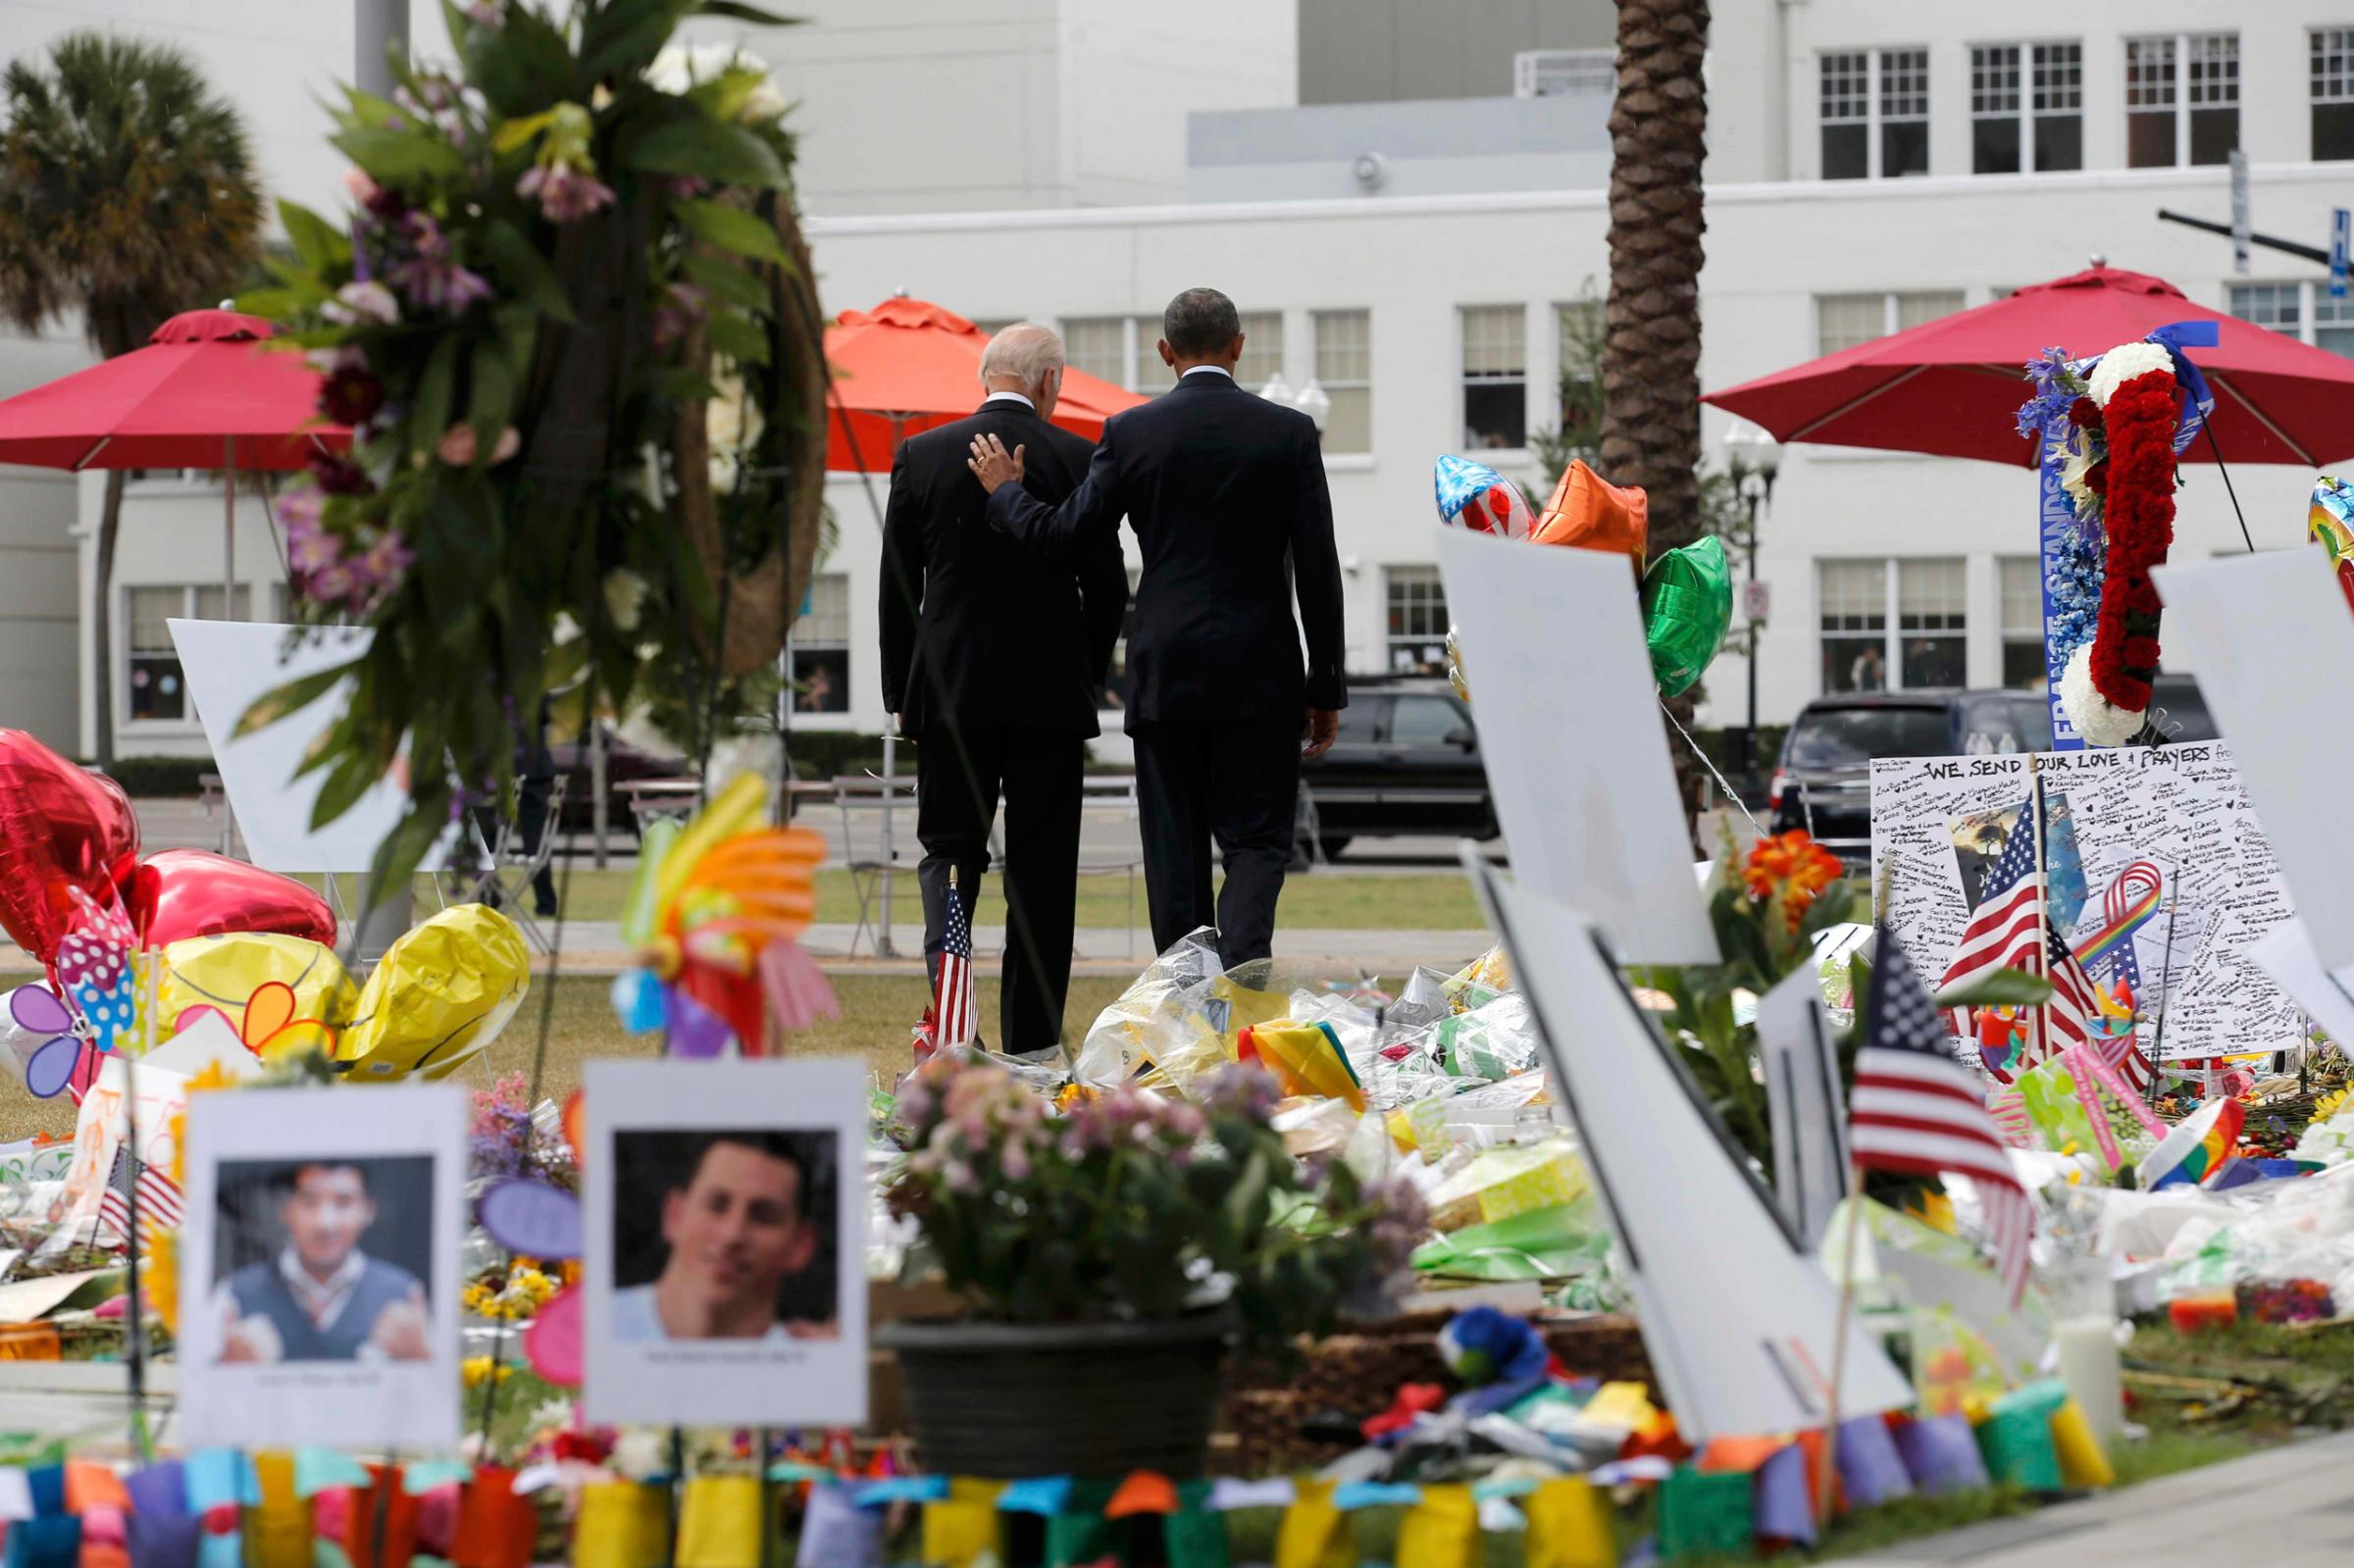 U.S. President Barack Obama (R) and Vice President Joe Biden depart a makeshift memorial after placing flowers in memory of shooting victims of the massacre at a gay nightclub in Orlando, Florida, U.S., June 16, 2016. REUTERS/Carlos Barria -TPX IMAGES OF THE DAY